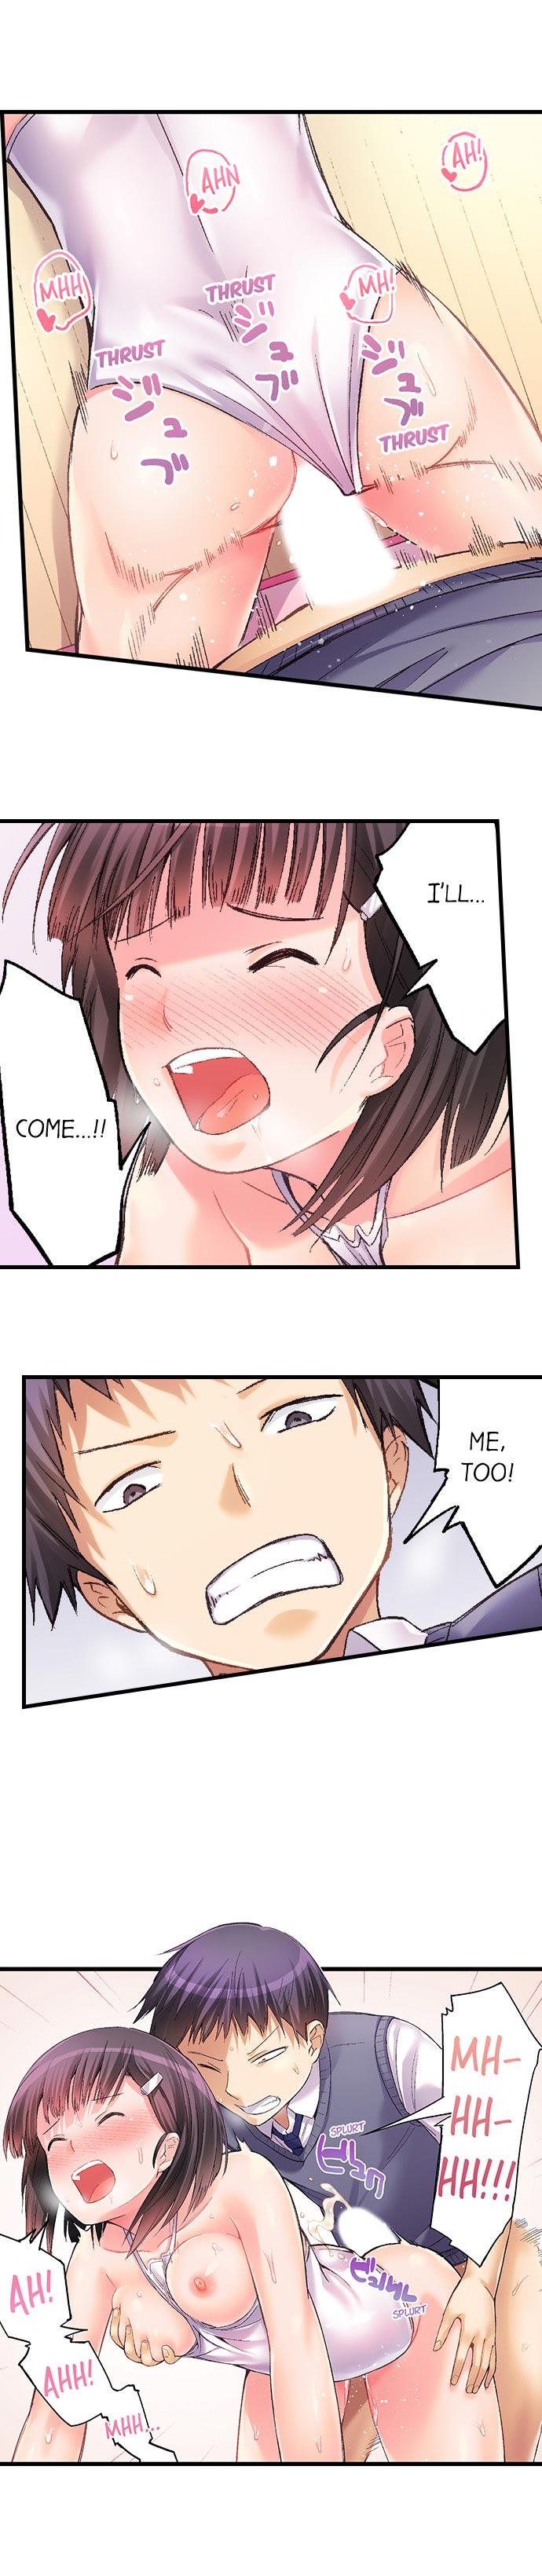 No Panty Booty Workout! Ch. 1 - 12 53